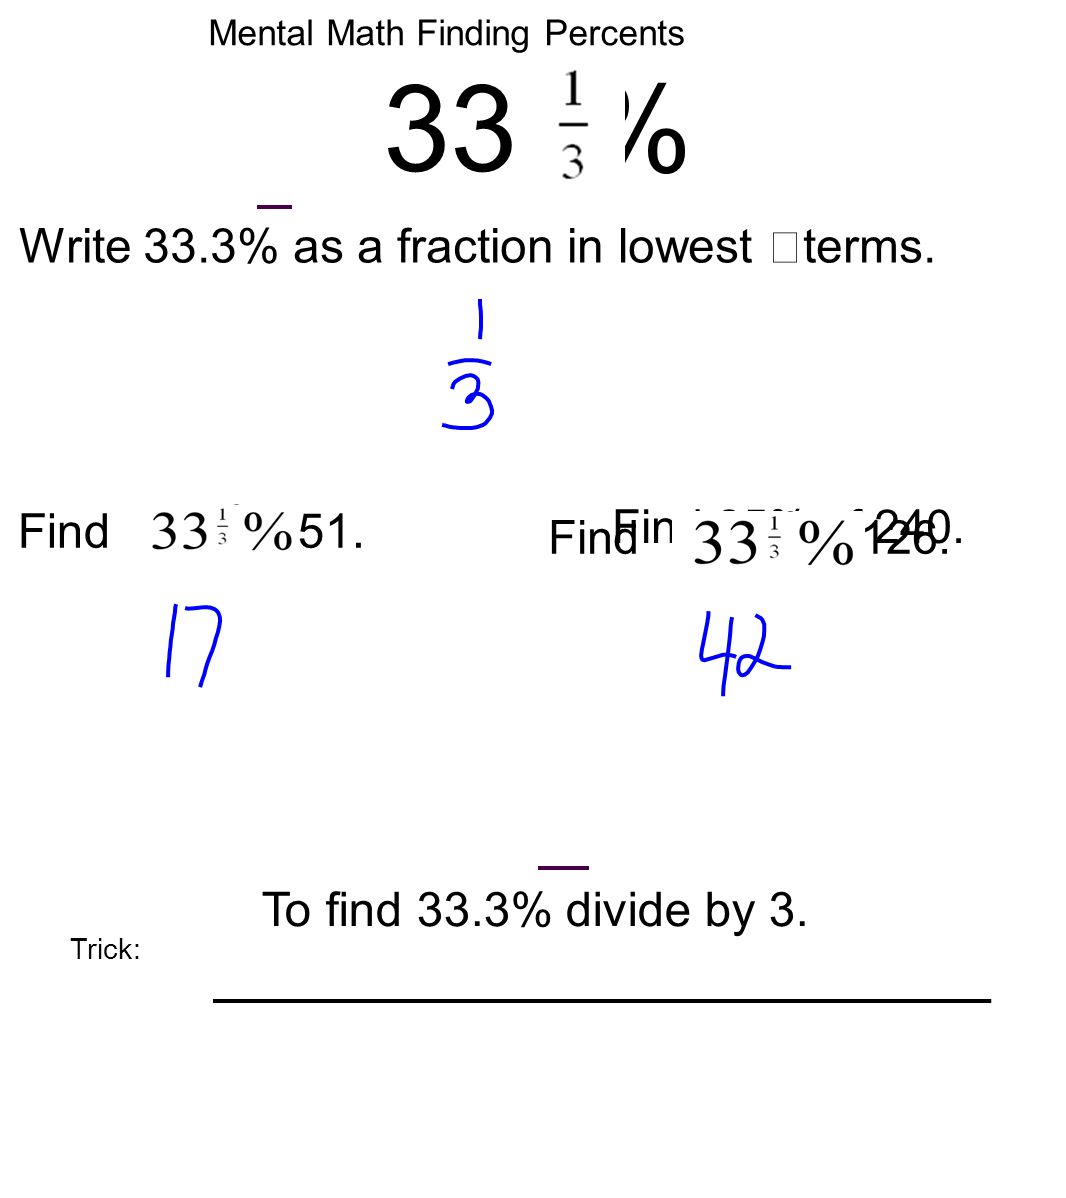 Mental Math Finding Percents 33 % Write 33.3% as a fraction in lowest terms.